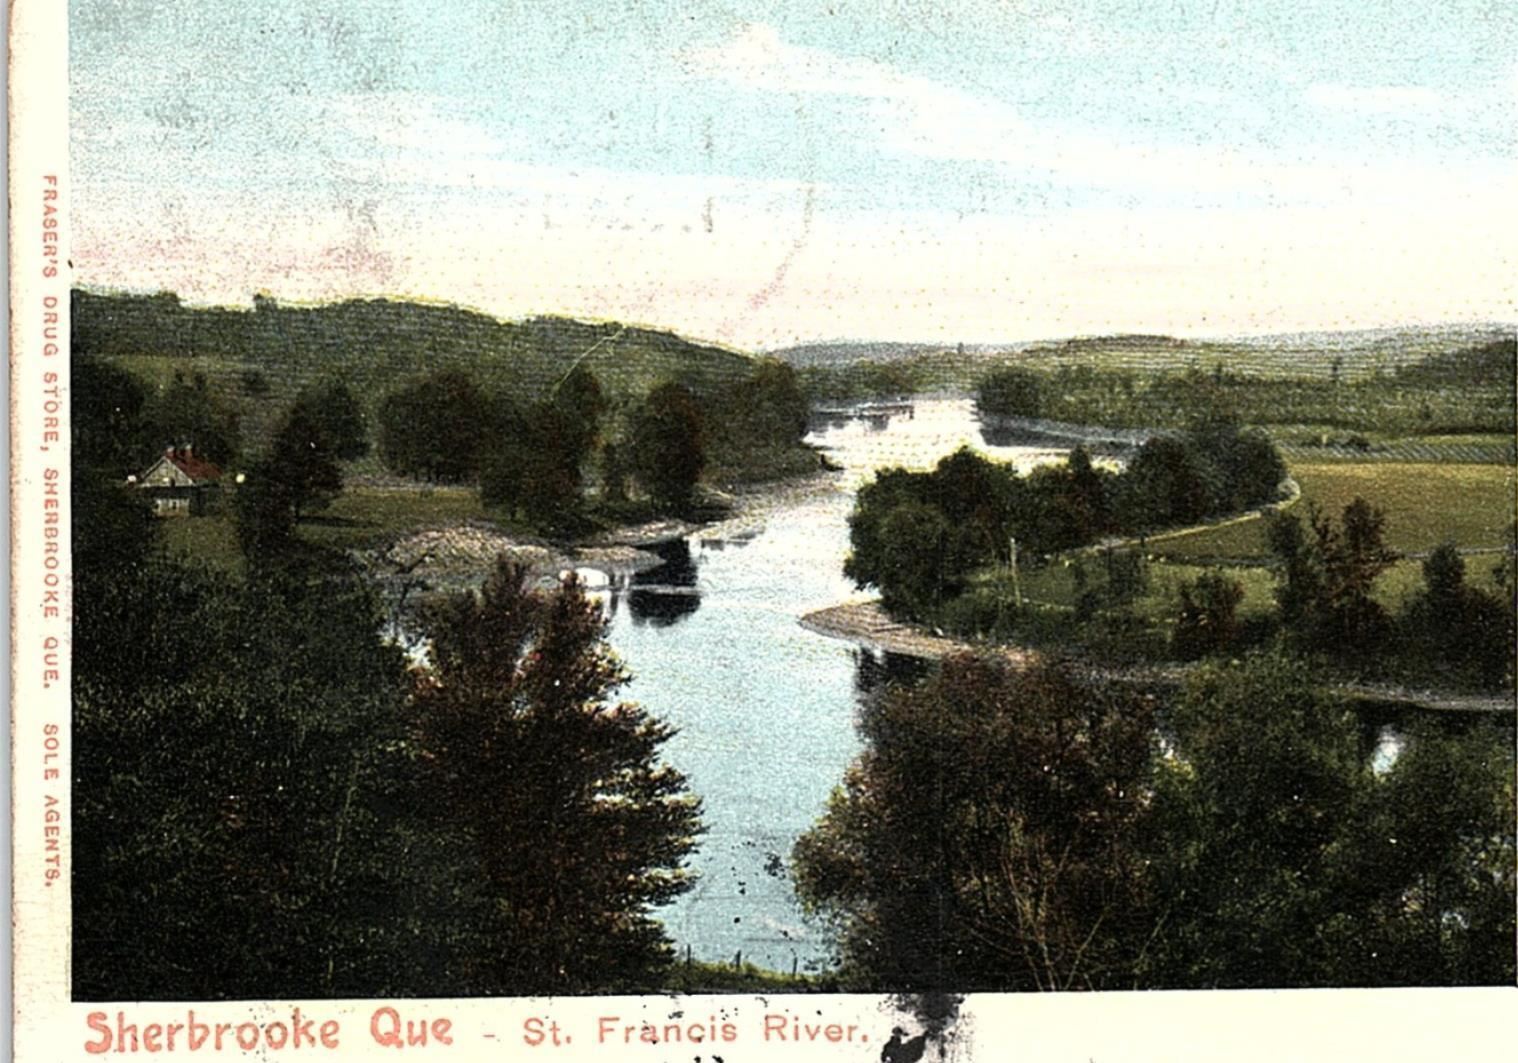 1905 SHERBROOKE QUE ST FRANCIS RIVER CANADA EARLY UNDIVIDED POSTCARD 43-16